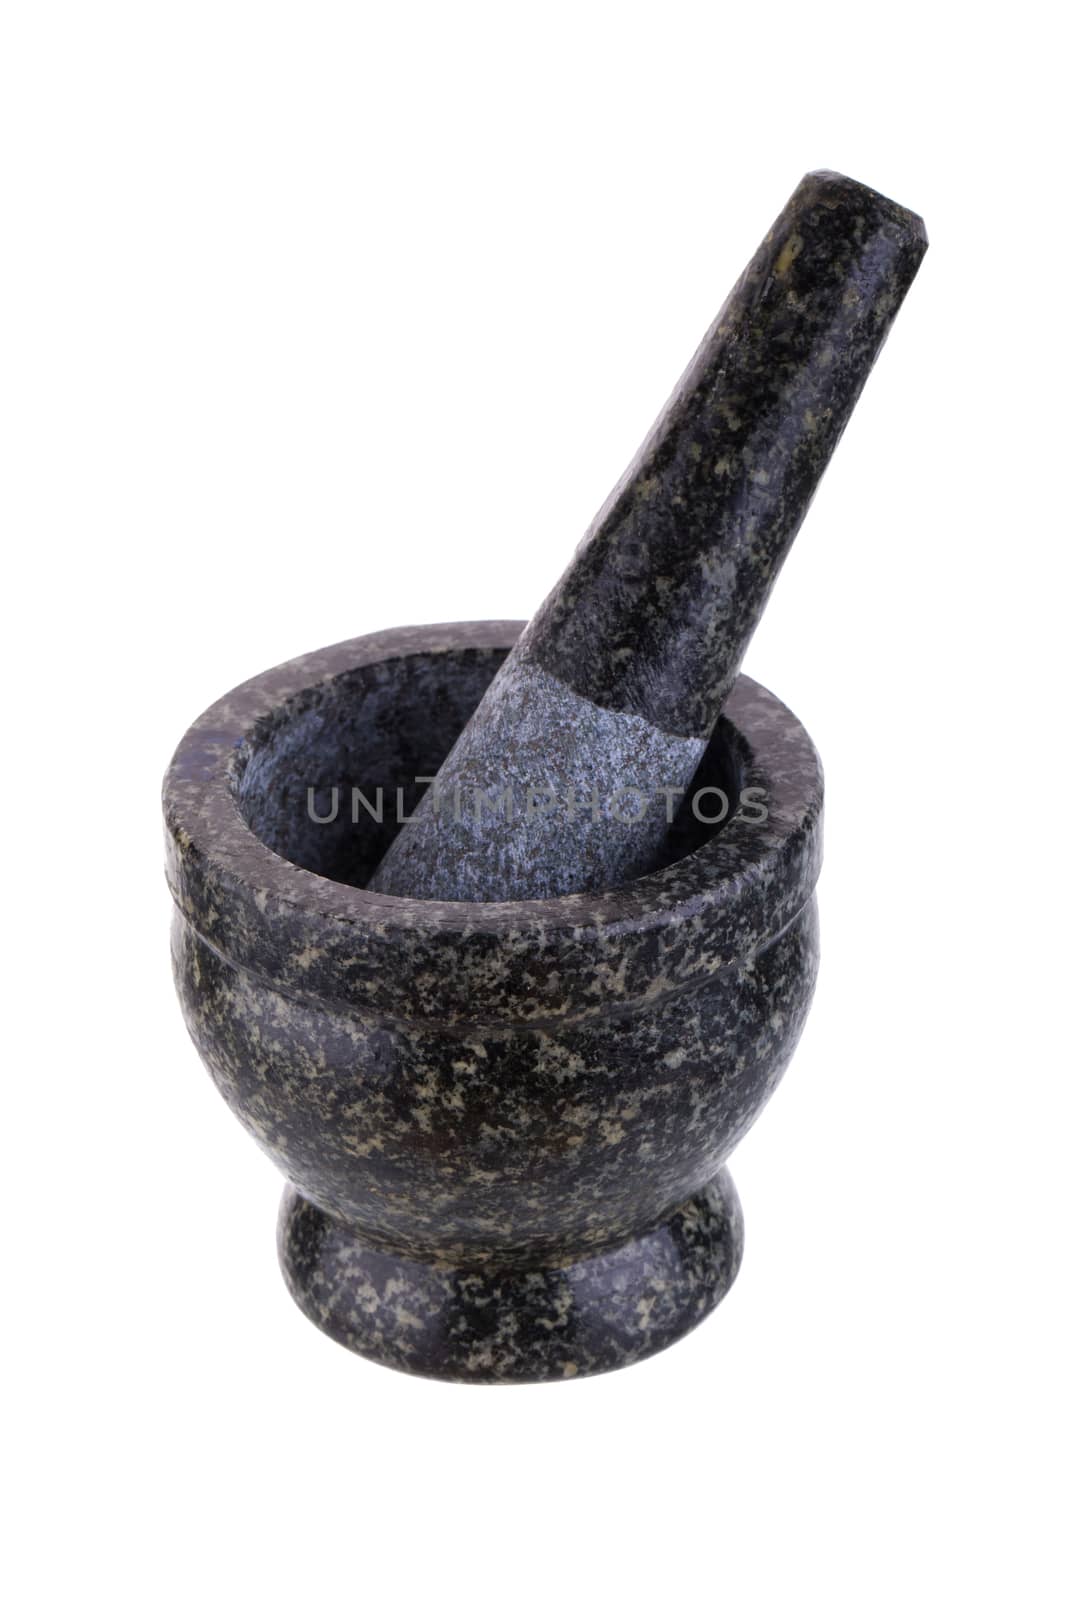 Stone Mortar and Pestle isolated on white background by kaiskynet